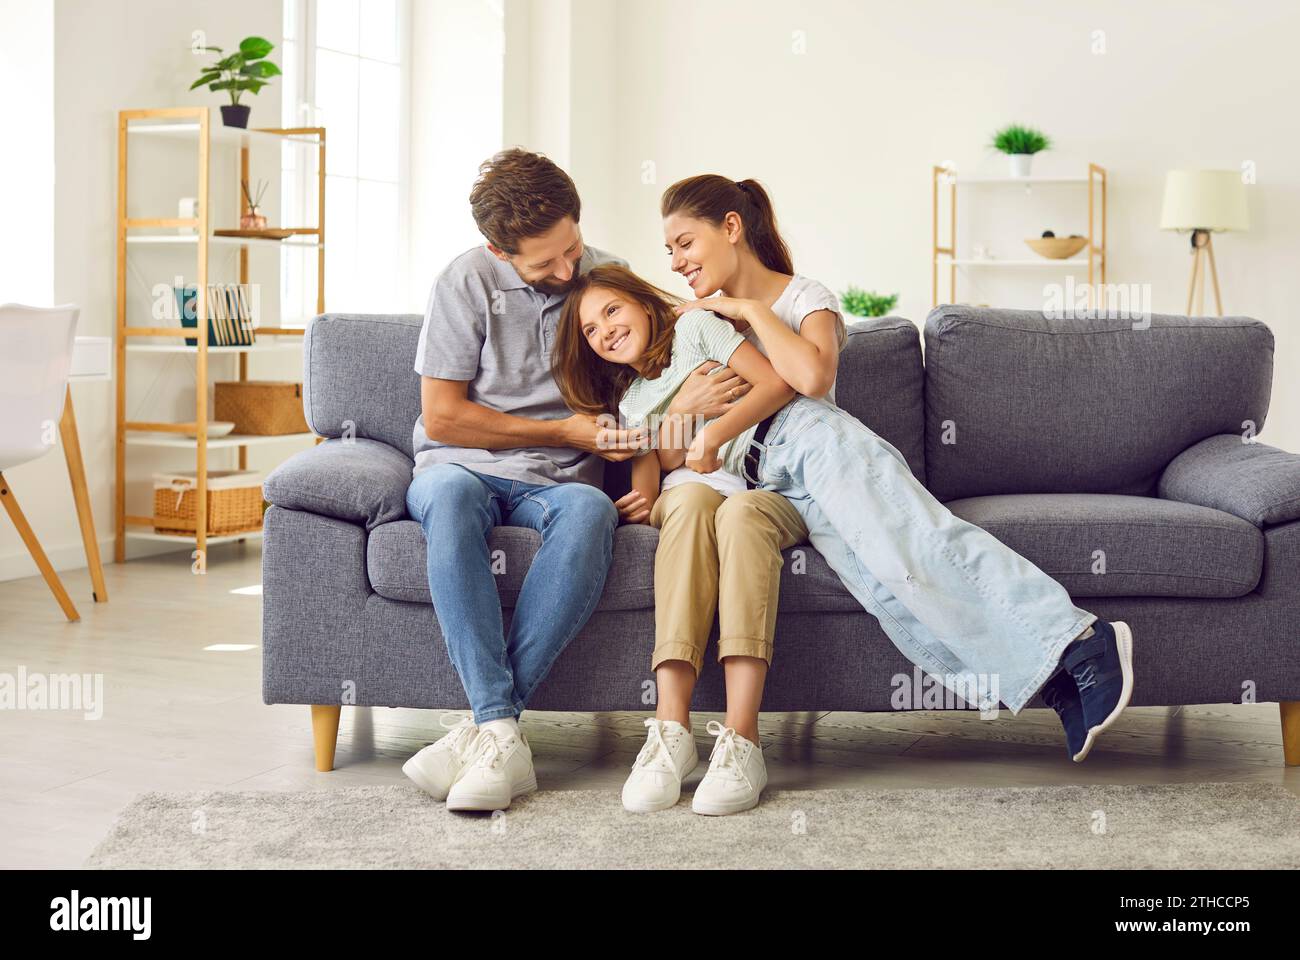 Happy, loving family spending time together and hugging on the couch in the living room Stock Photo